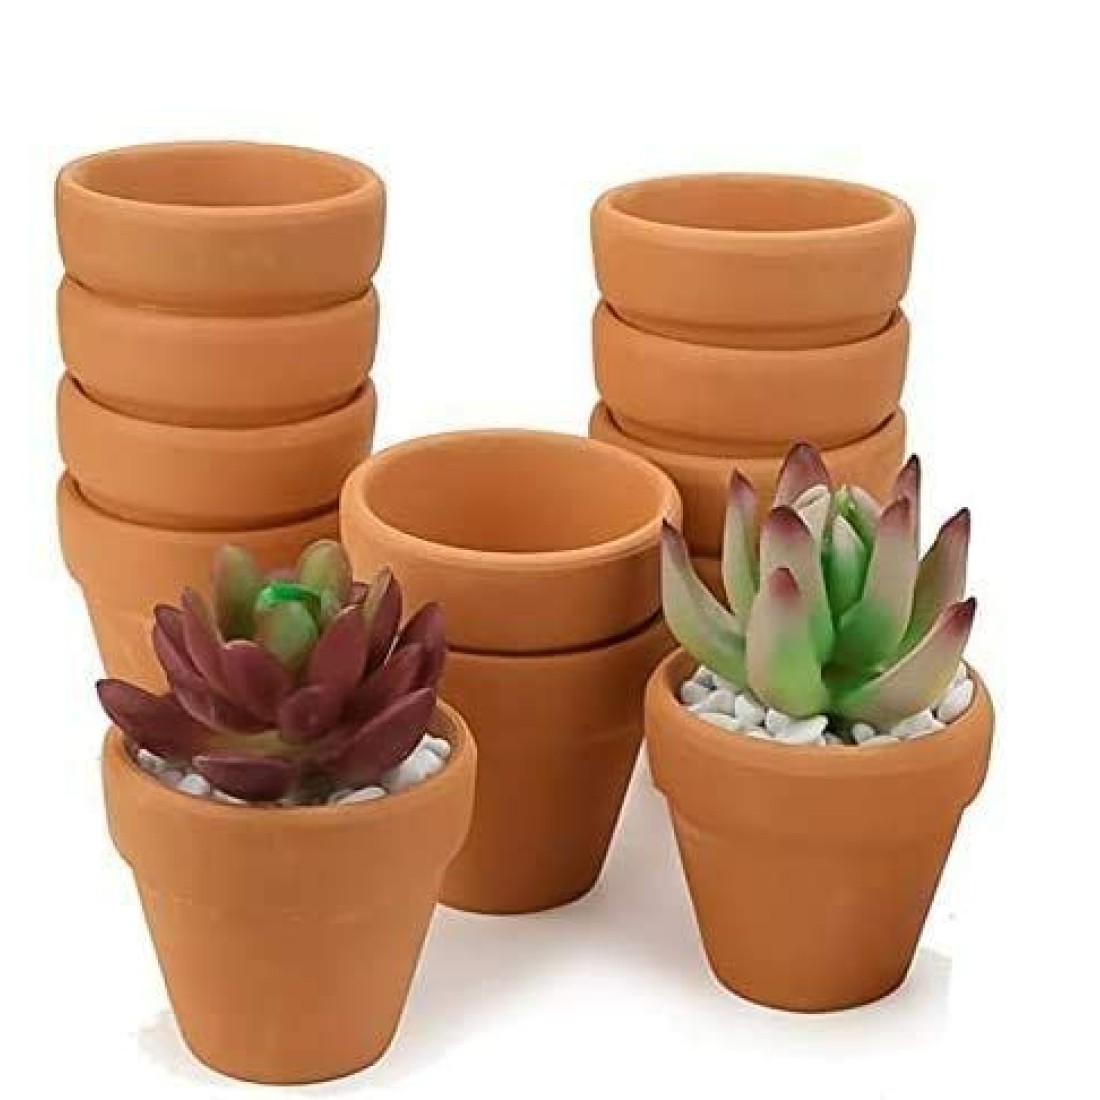 Terra Cotta Pots with Saucer- 4” inch Clay Ceramic Pottery Planter Cactus Flower Pots Succulent Pot Drainage Hole for Cacti,Succulent, Indoor Plant & Crafts (4 inches) (6) 2